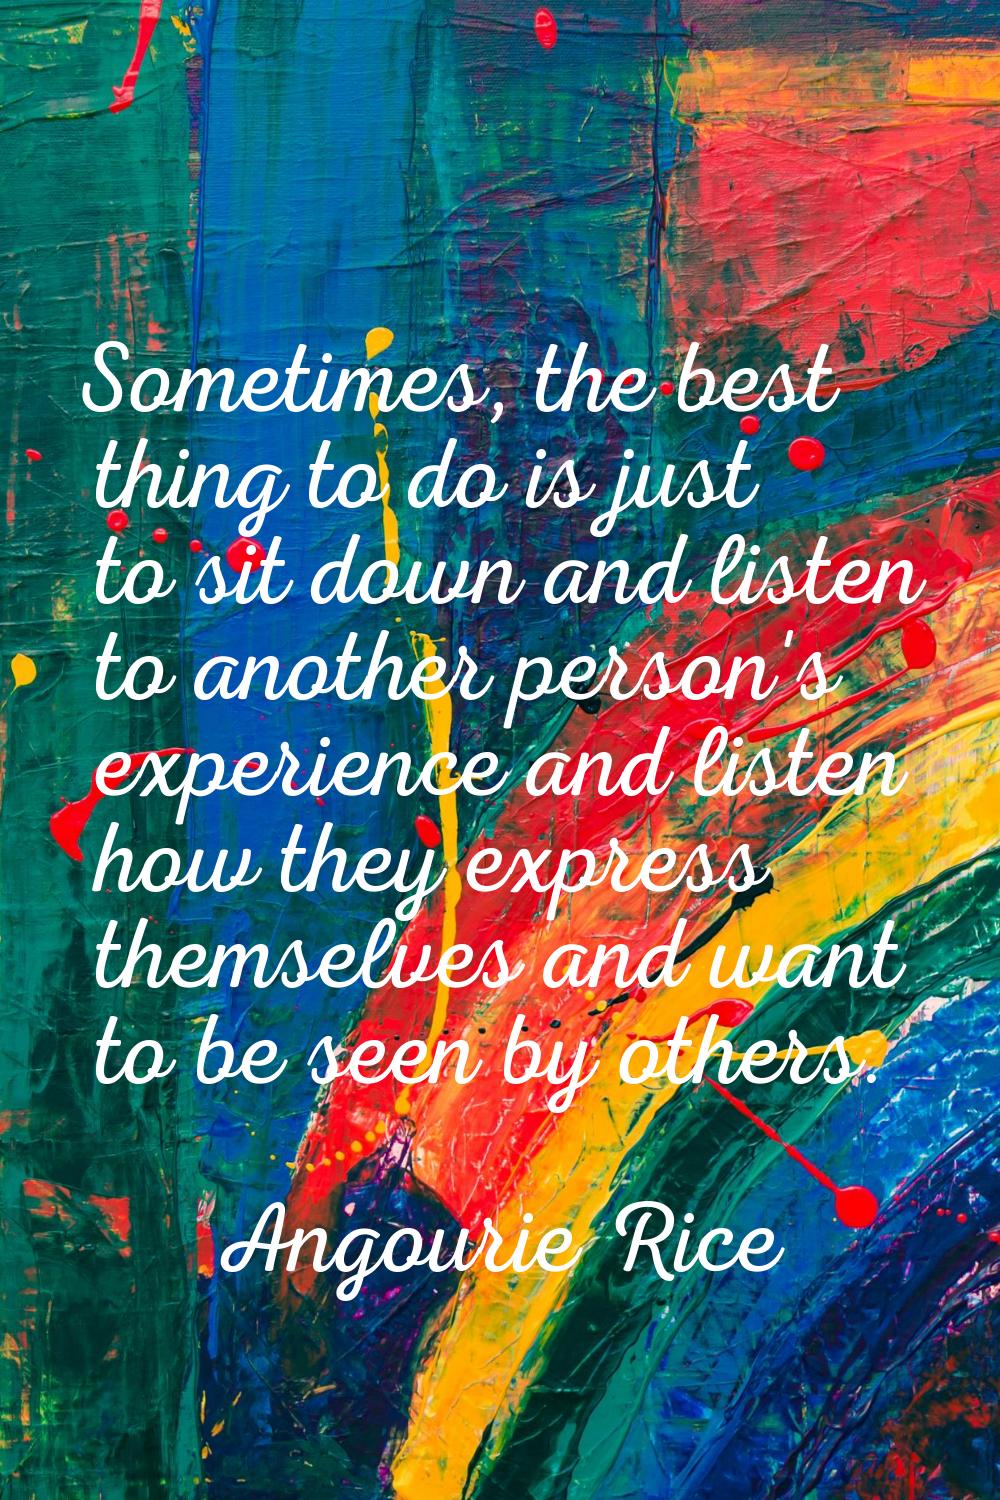 Sometimes, the best thing to do is just to sit down and listen to another person's experience and l